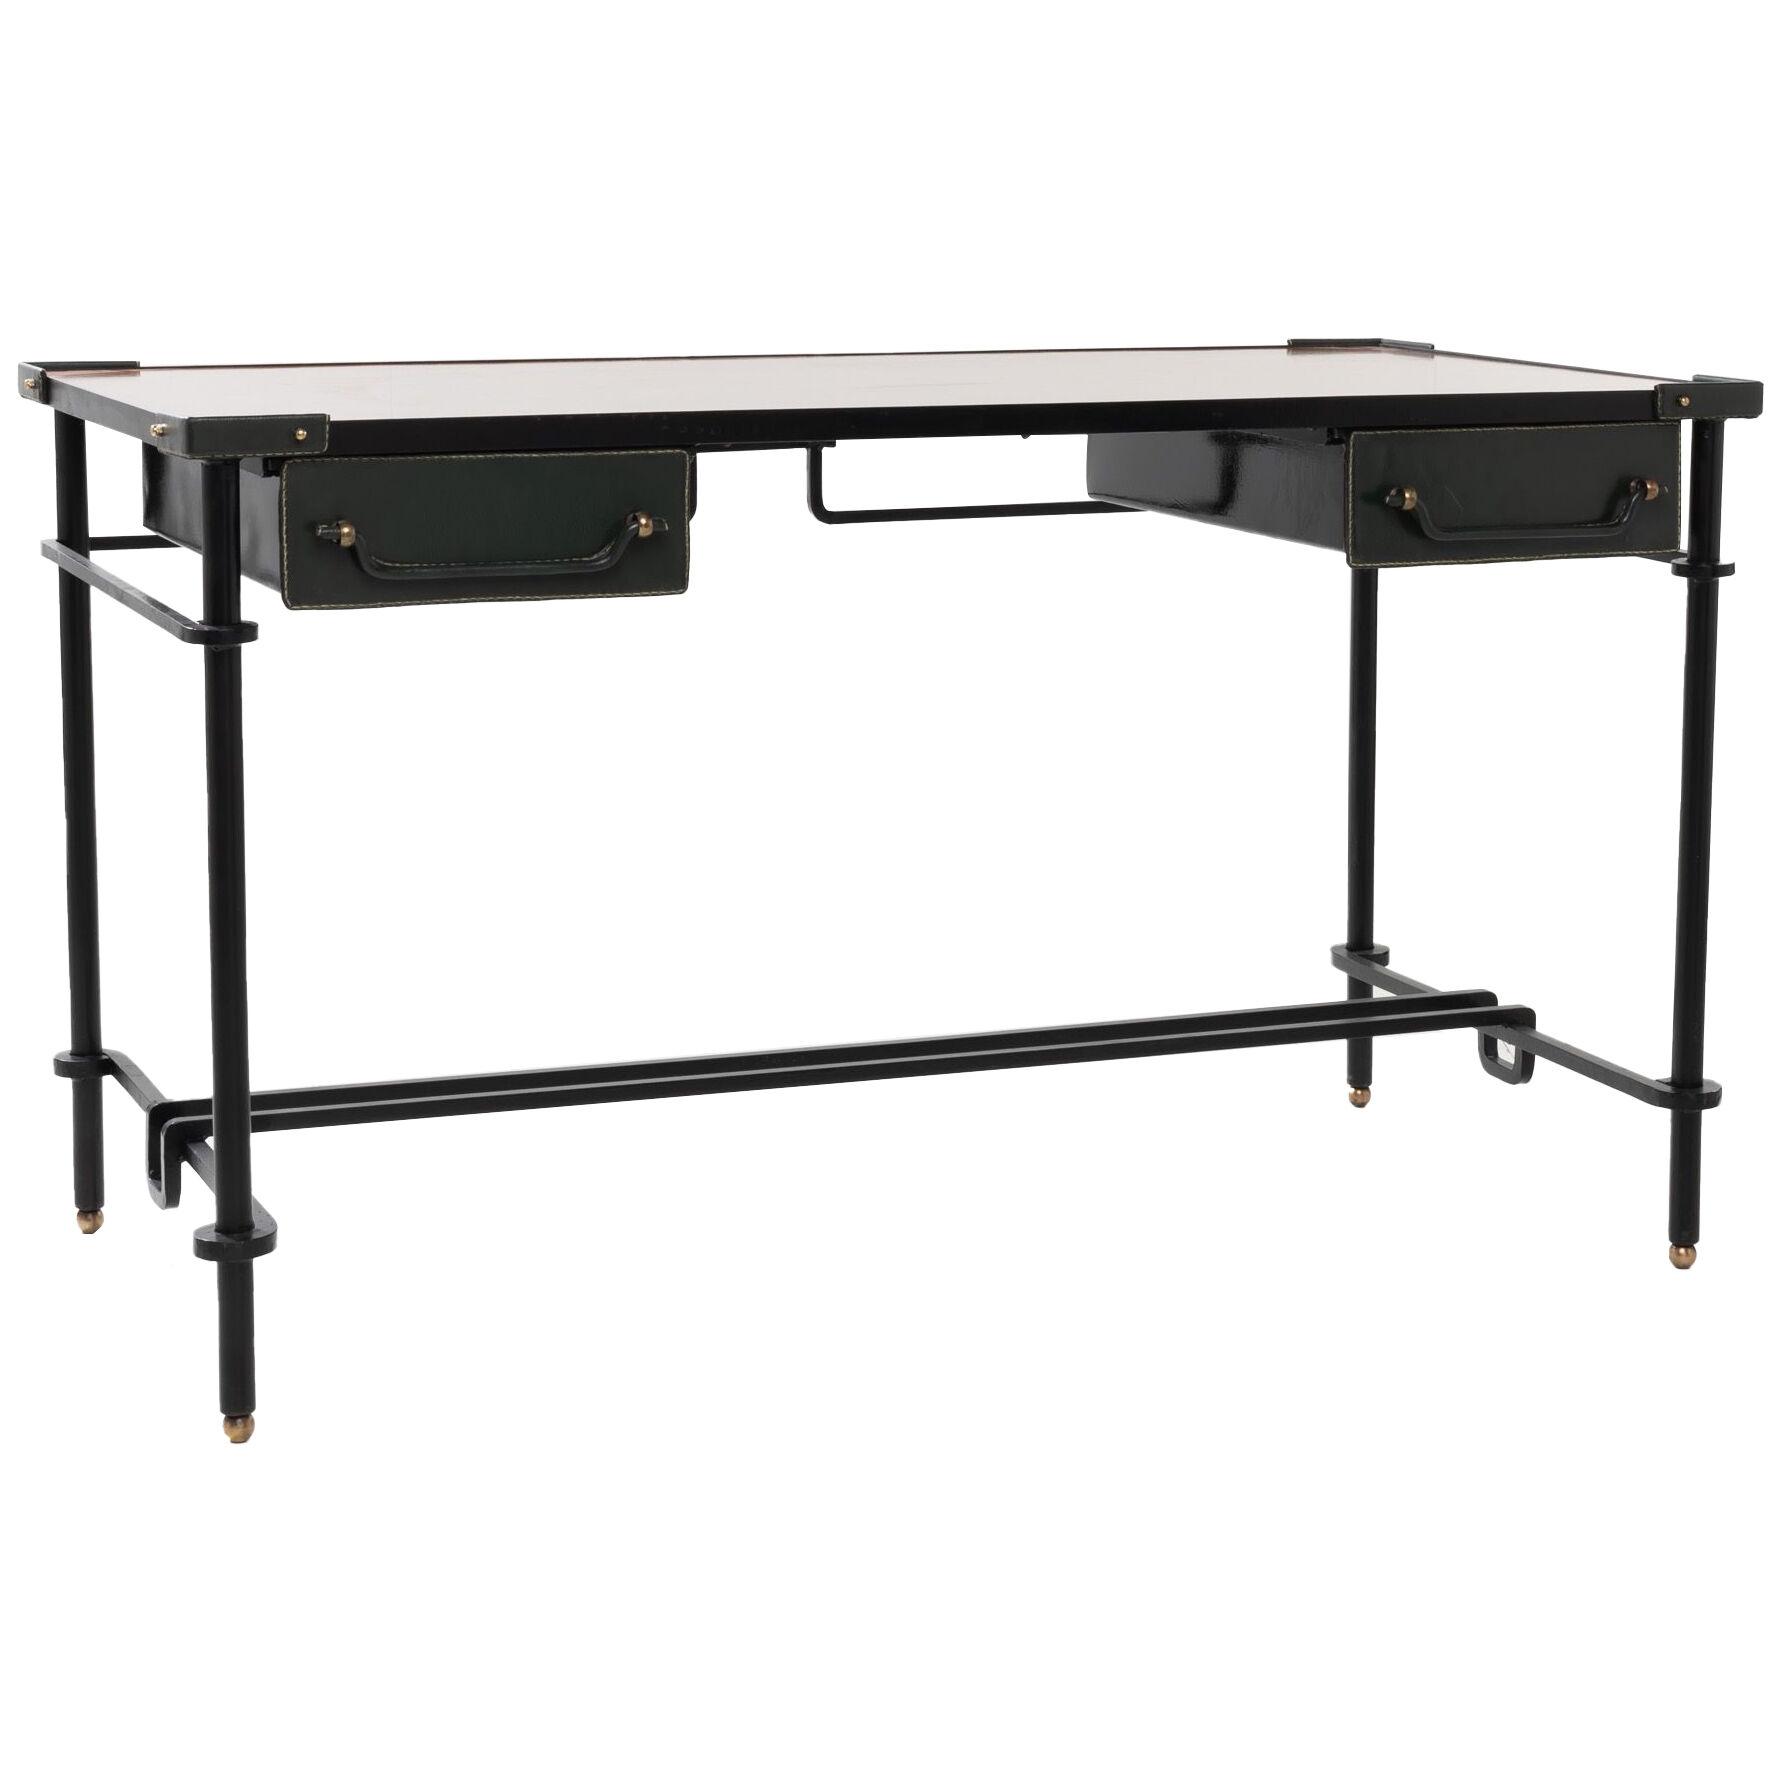 Wrought iron desk with two sliding drawers by Jacques Adnet